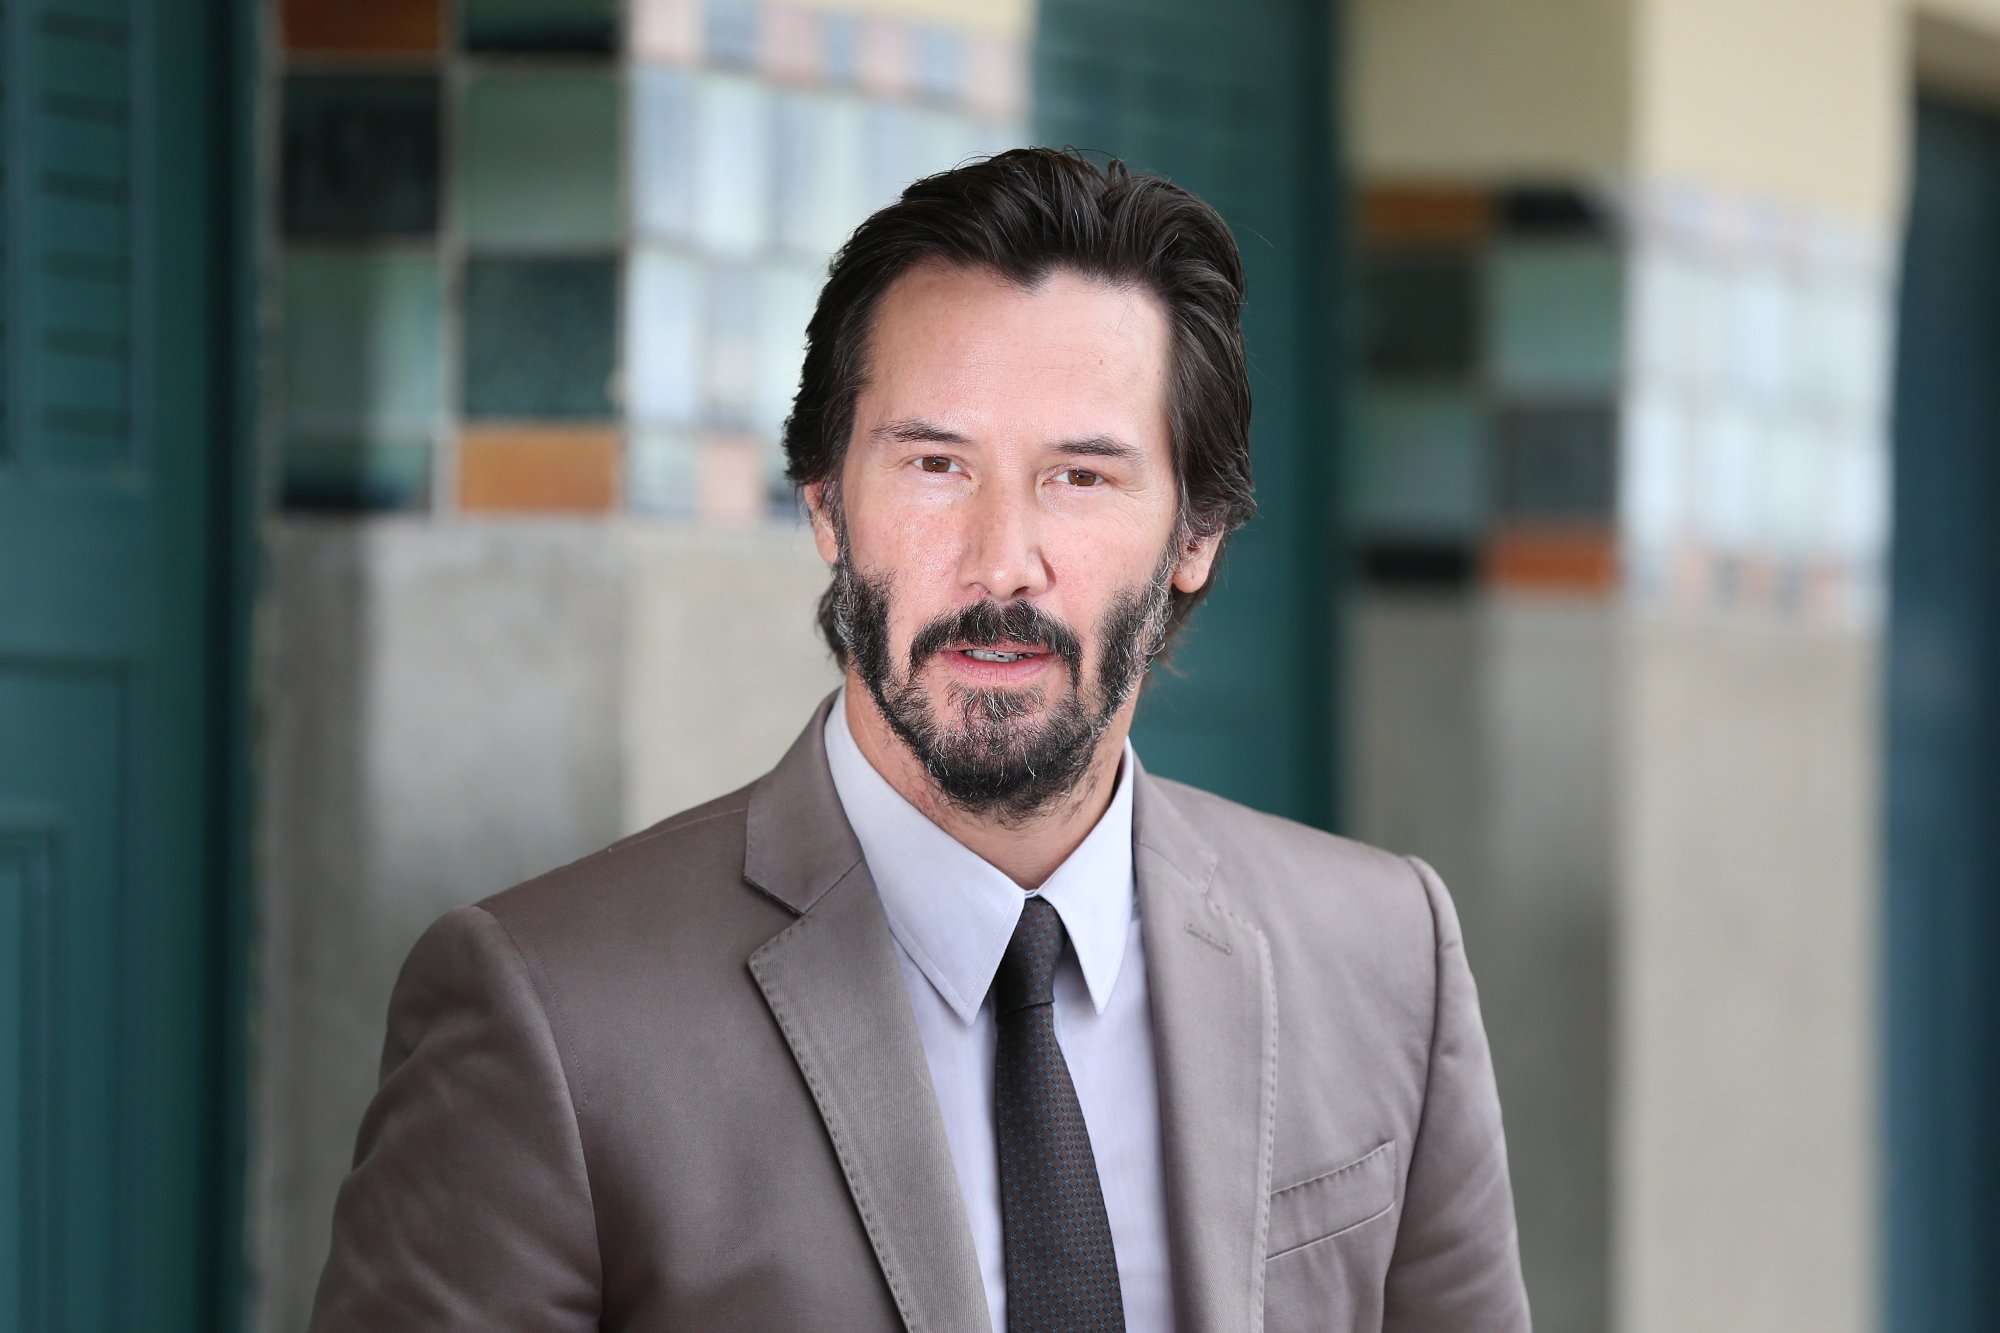 'The Gift' actor Keanu Reeves wearing a suit in front of tiled pillars